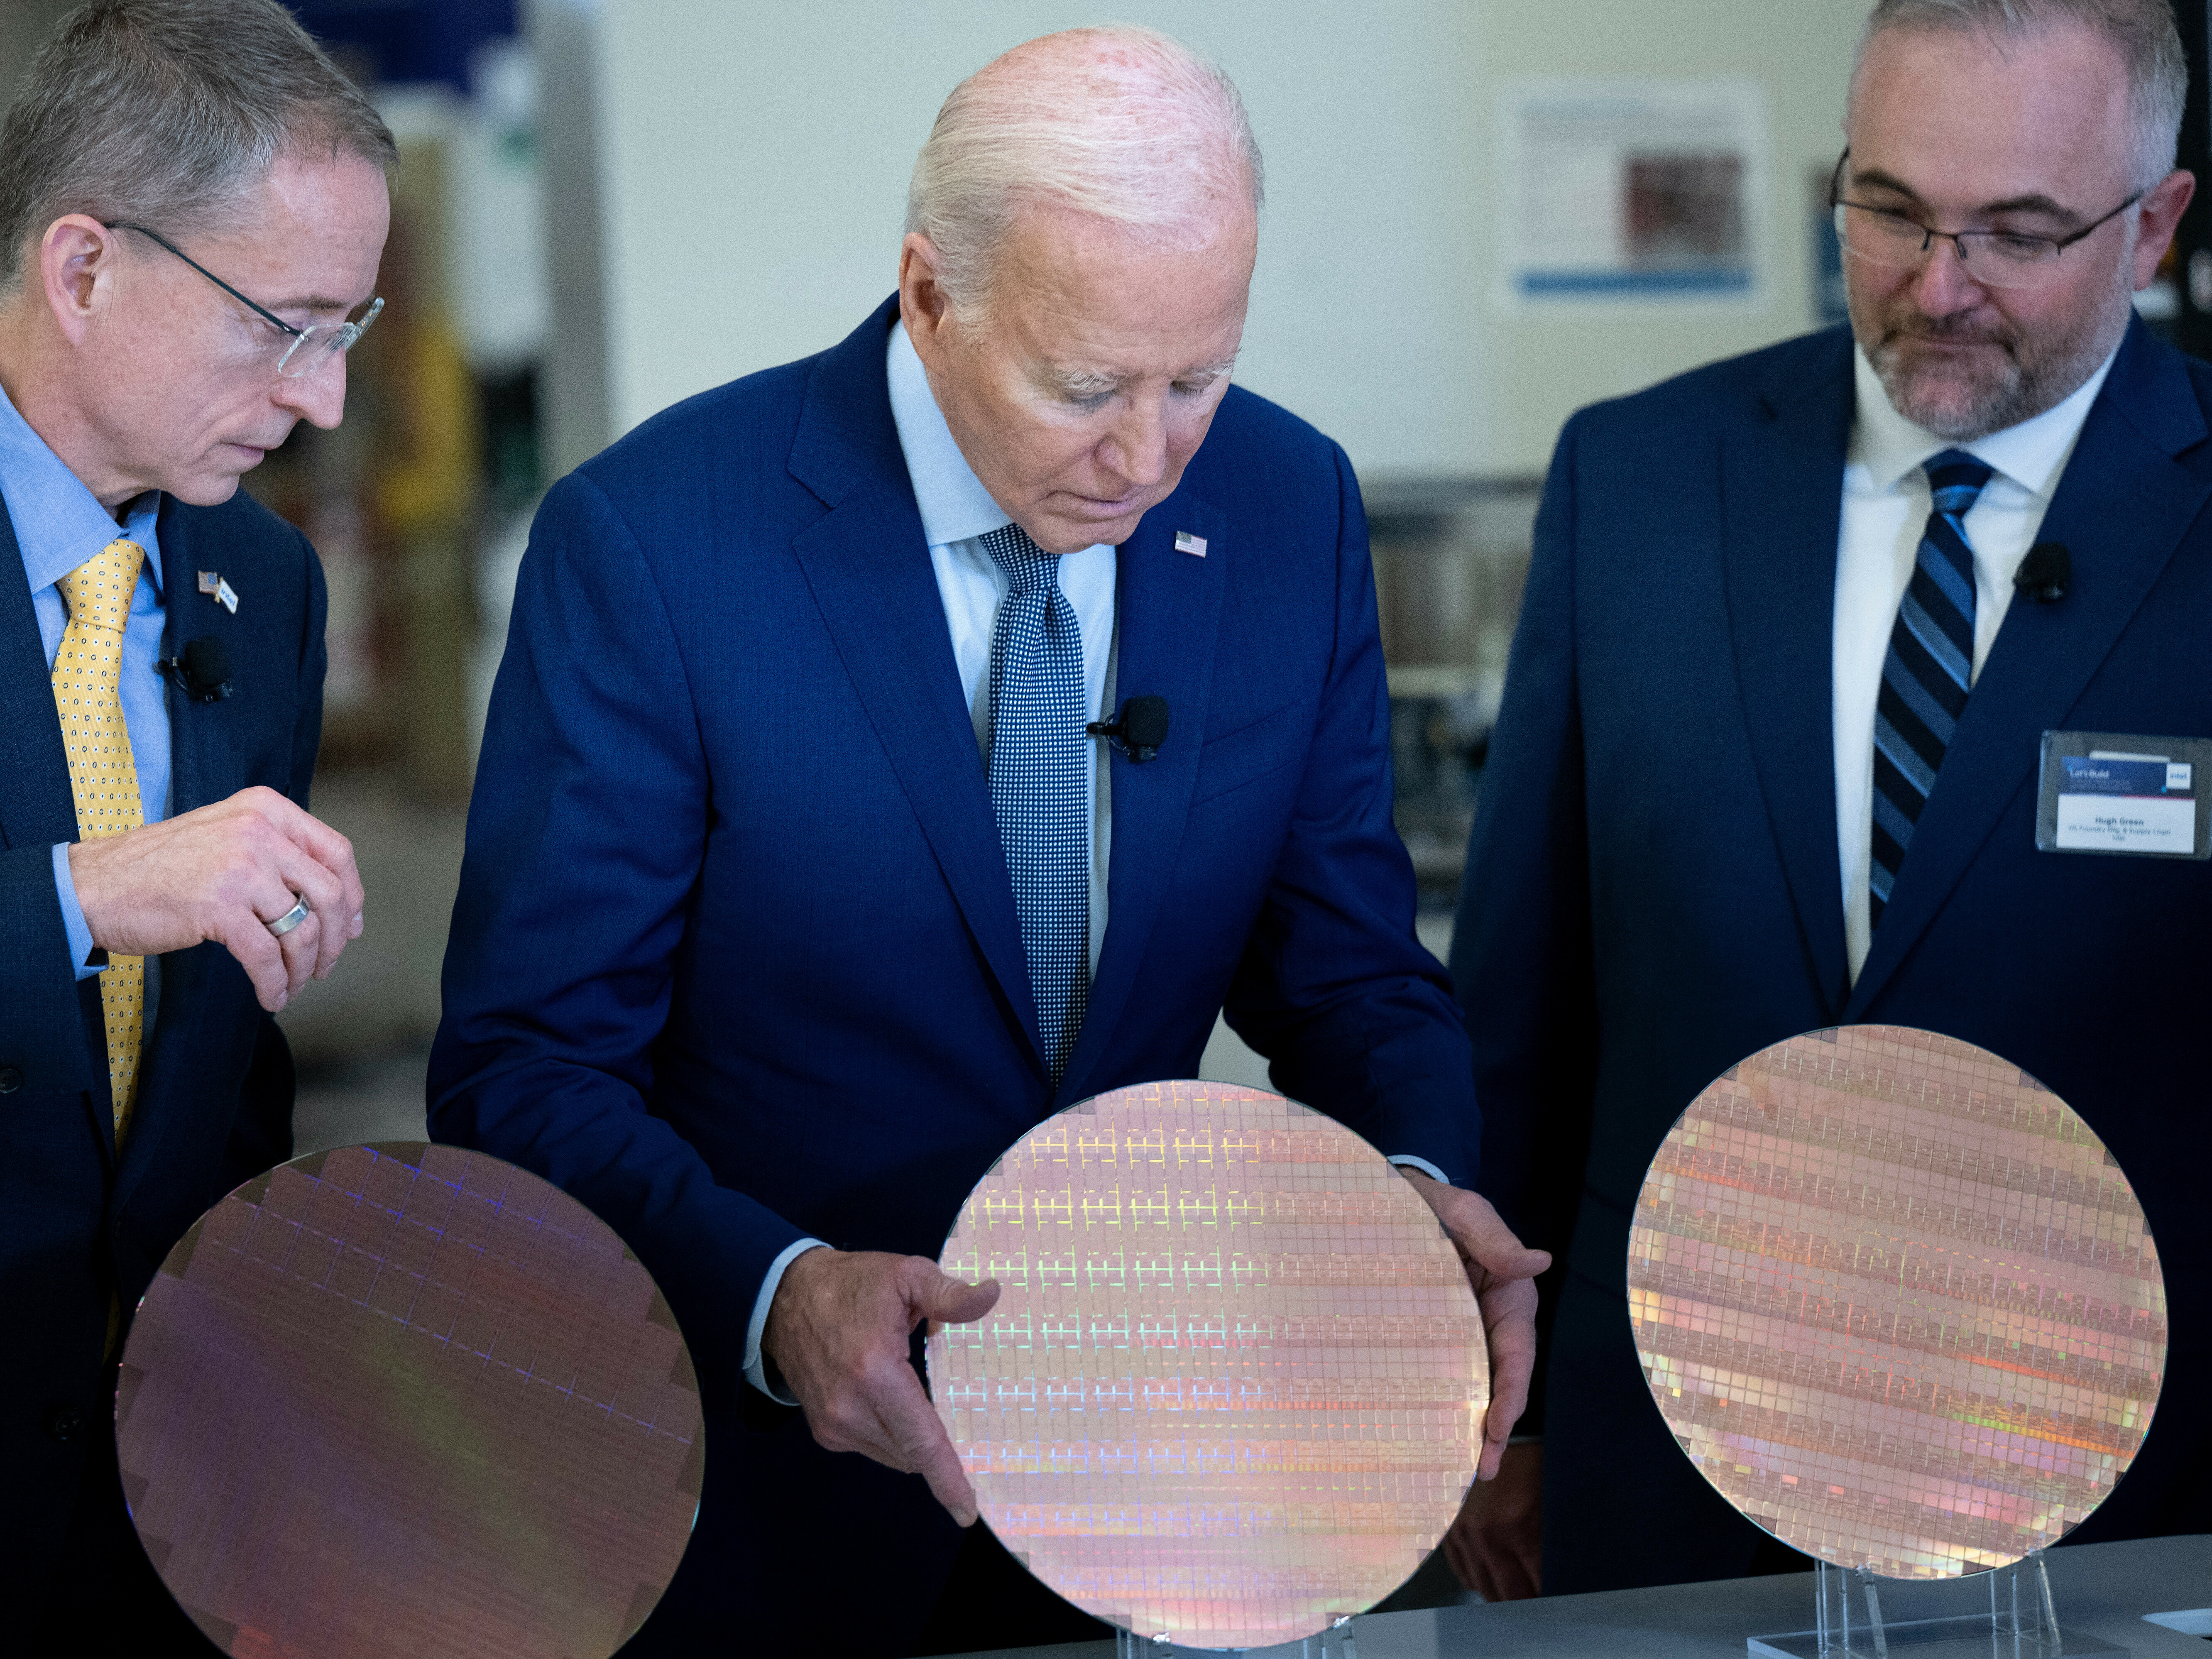 Intel CEO Pat Gelsinger (L) and Intel Factory Manager Hugh Green (R) watch as US President Joe Biden (C) looks at a semiconductor wafer during a tour at Intel Ocotillo Campus in Chandler, Arizona, this week. The White House unveiled almost $20 billion in new grants and loans Wednesday to support Intel